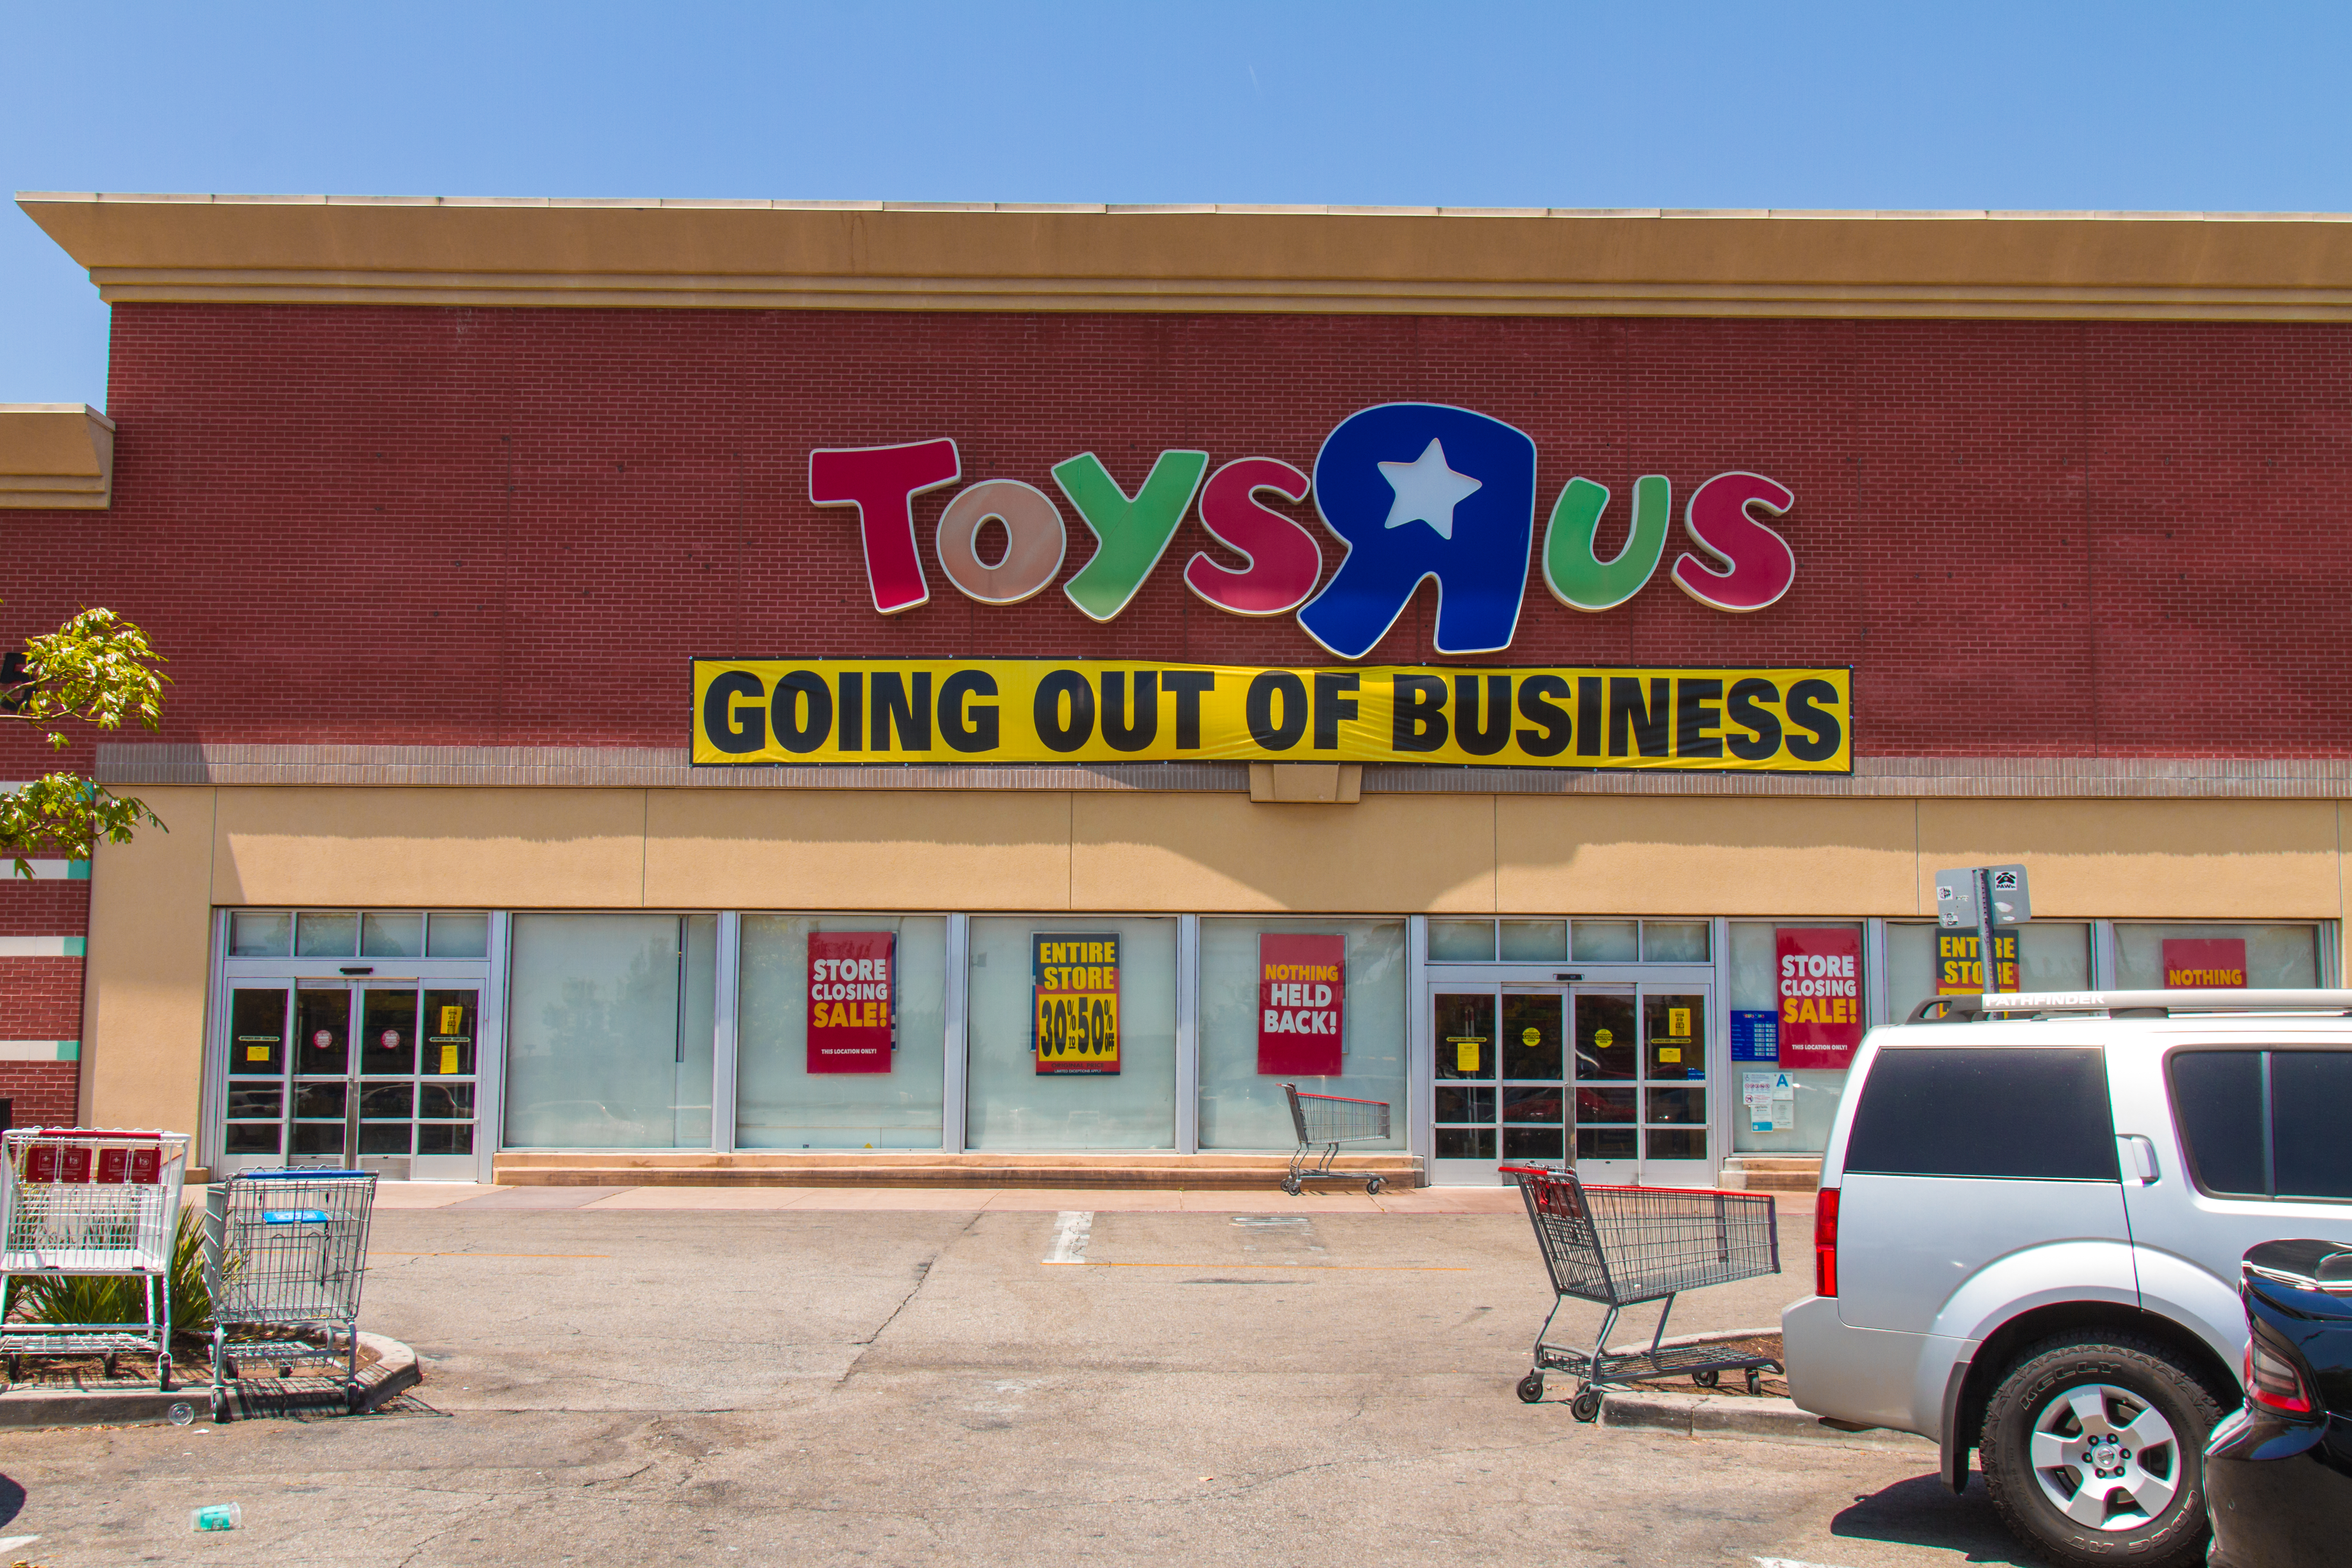 Toys 'R' Us Closing Sale: What Are the 